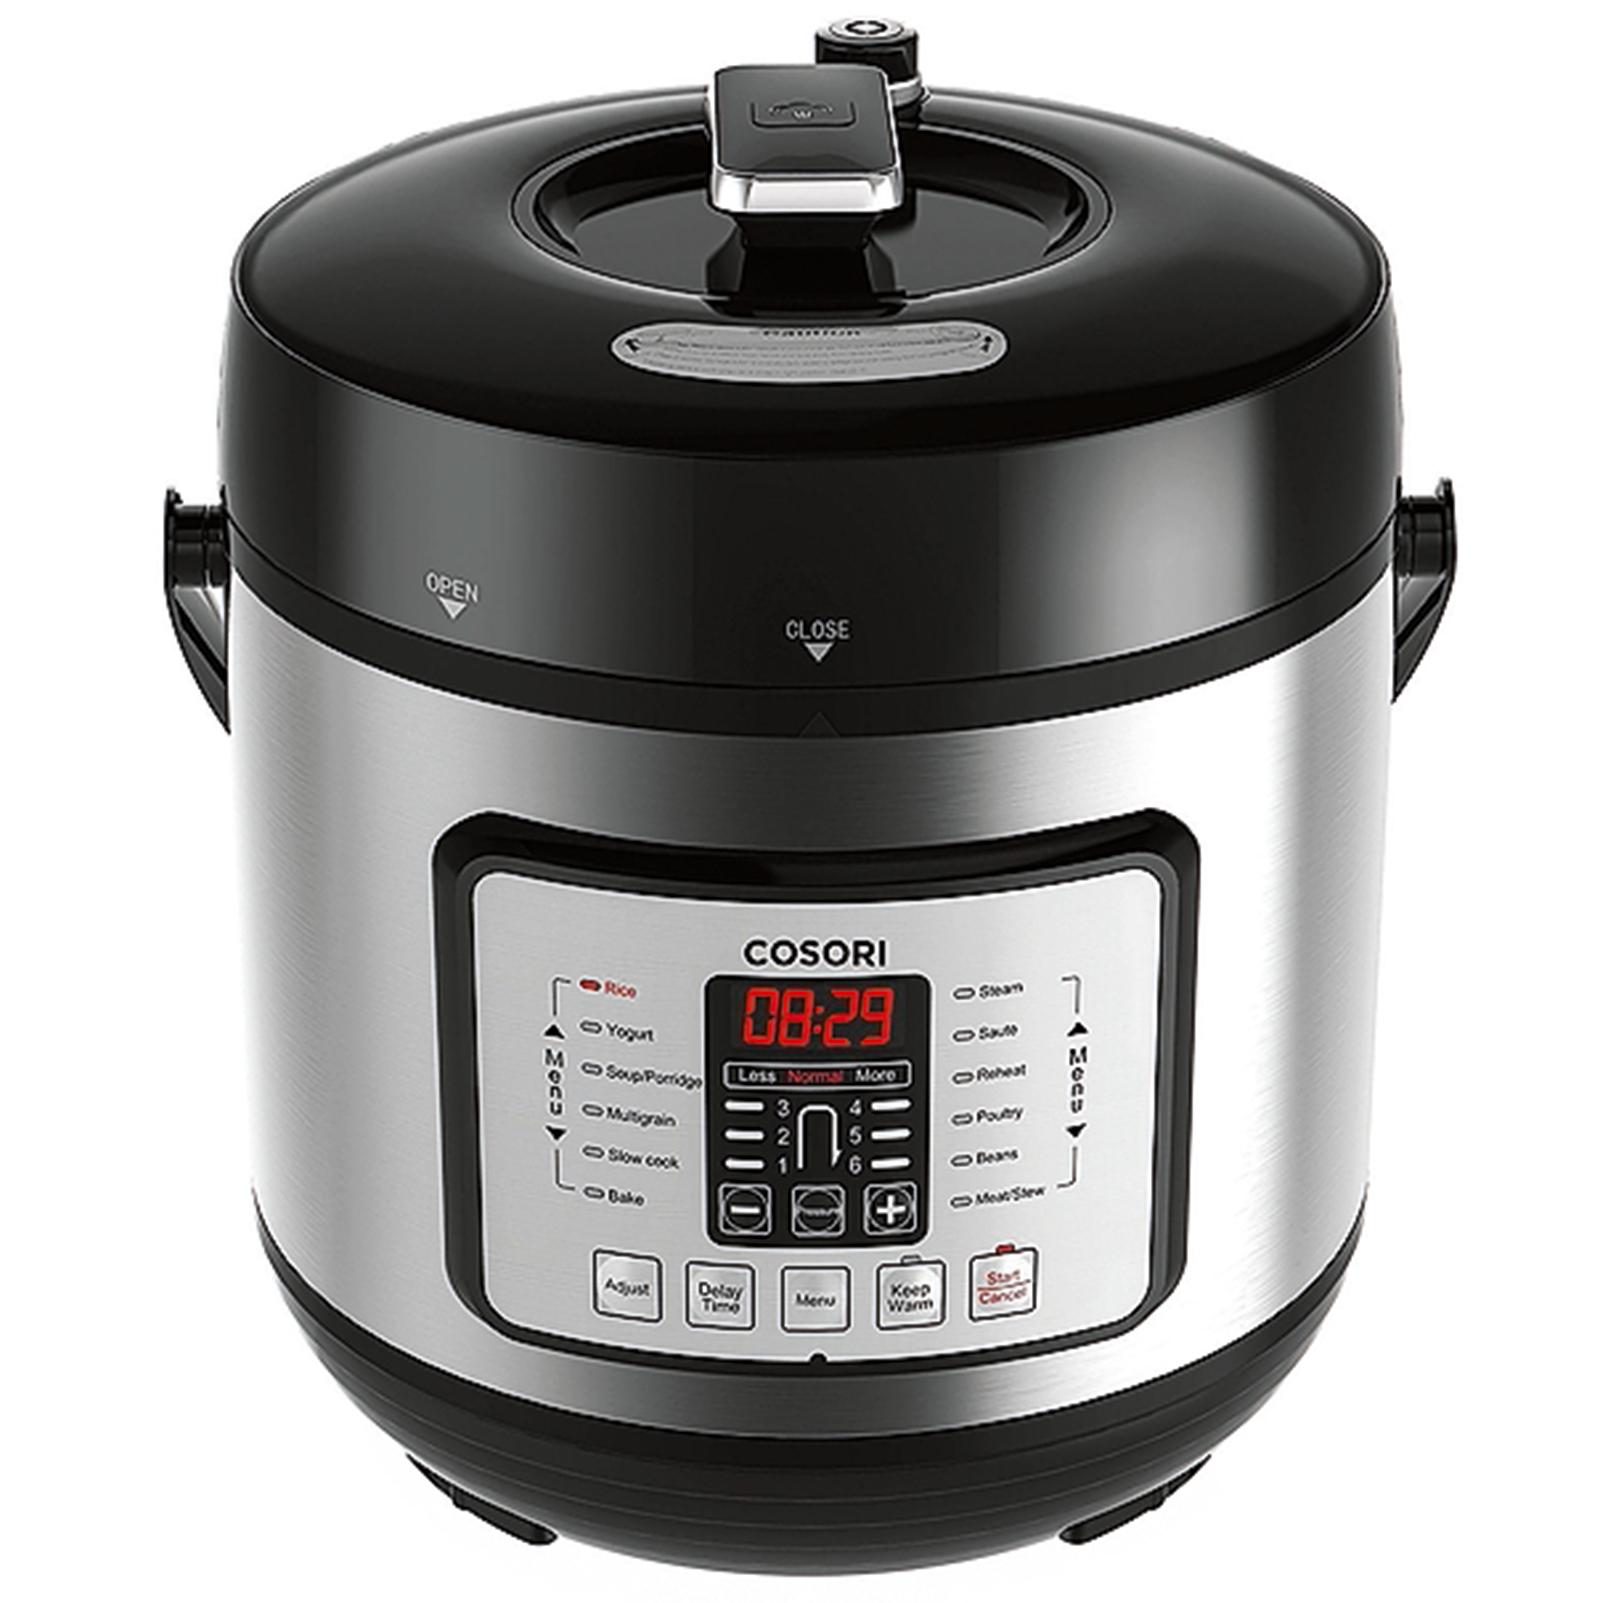 Pressure cookers steam фото 117